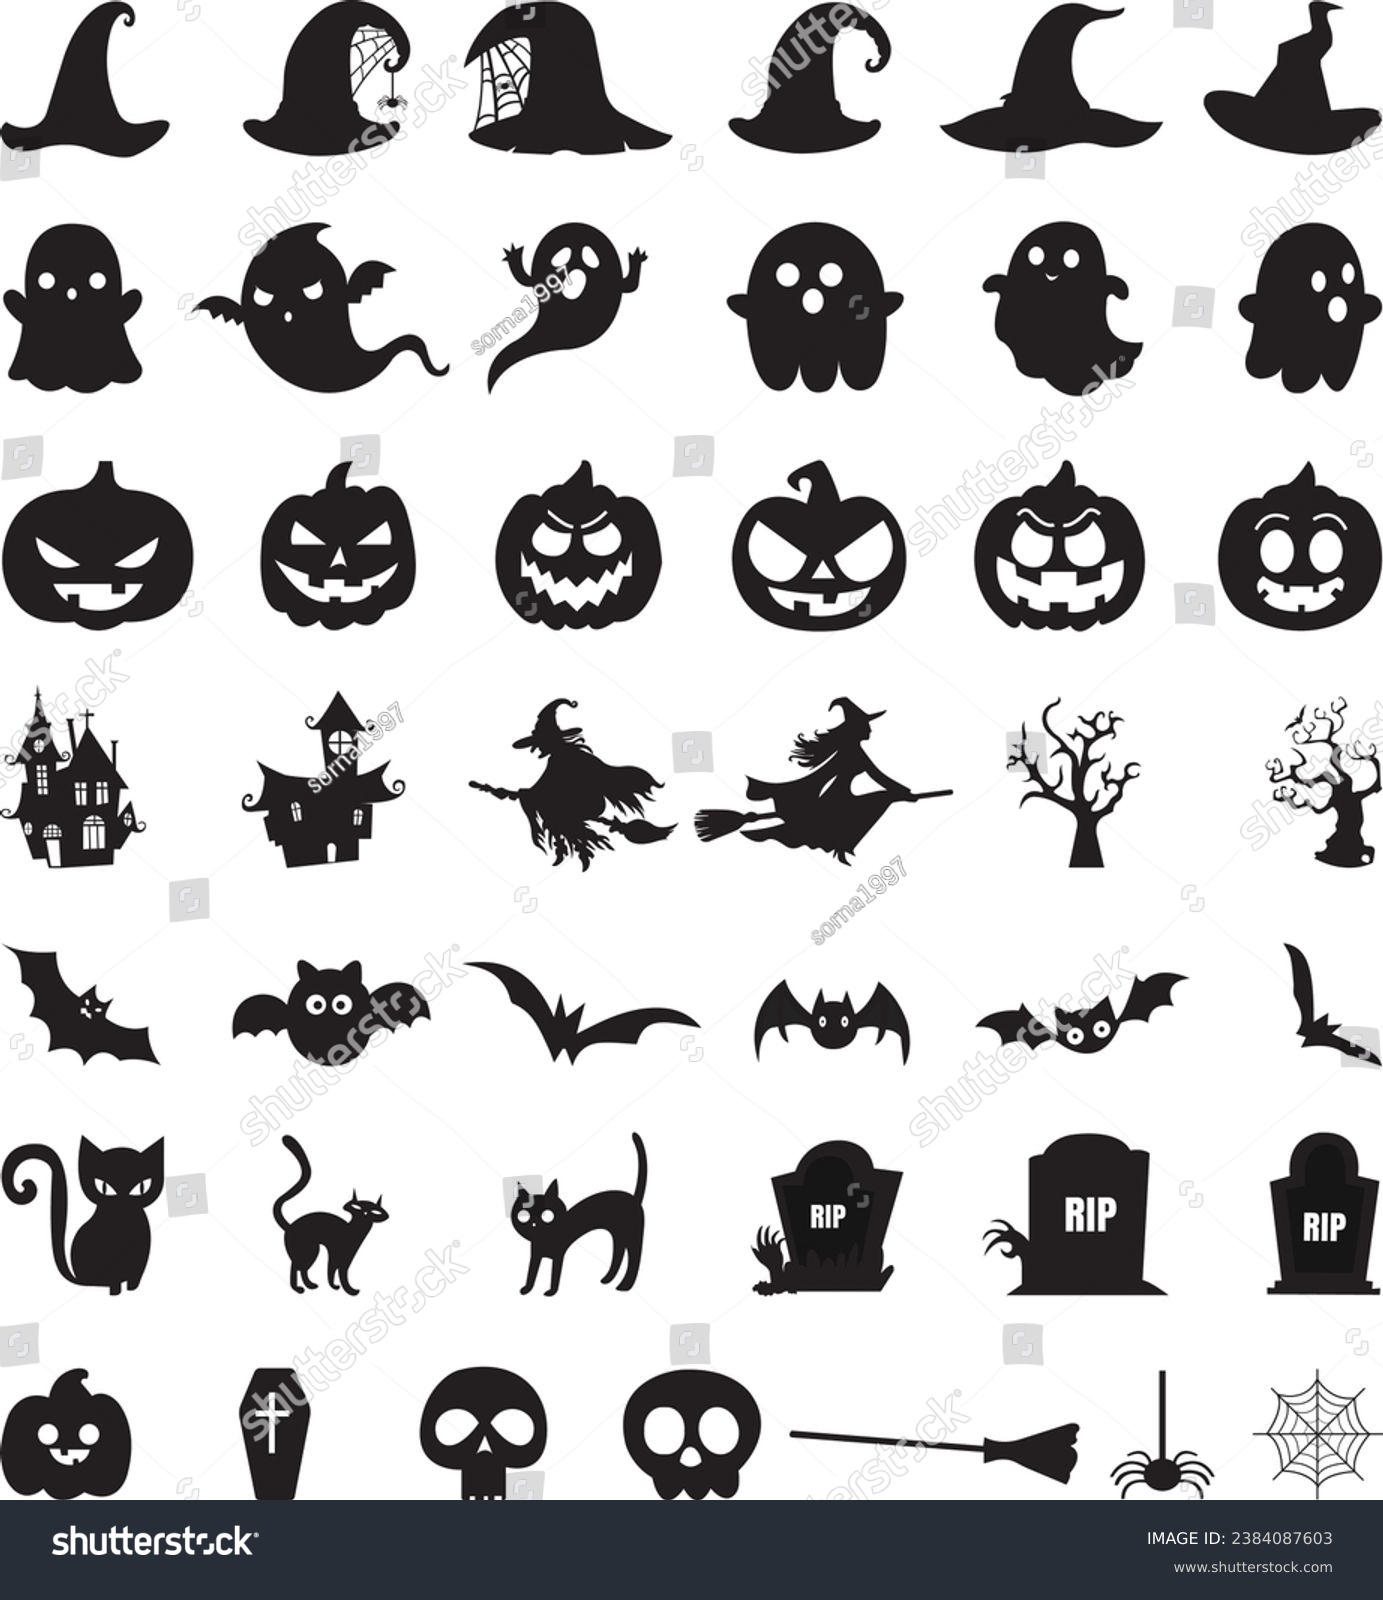 SVG of Black hallo ween icons silhouette t shirt set of hallo ween elements collection. svg